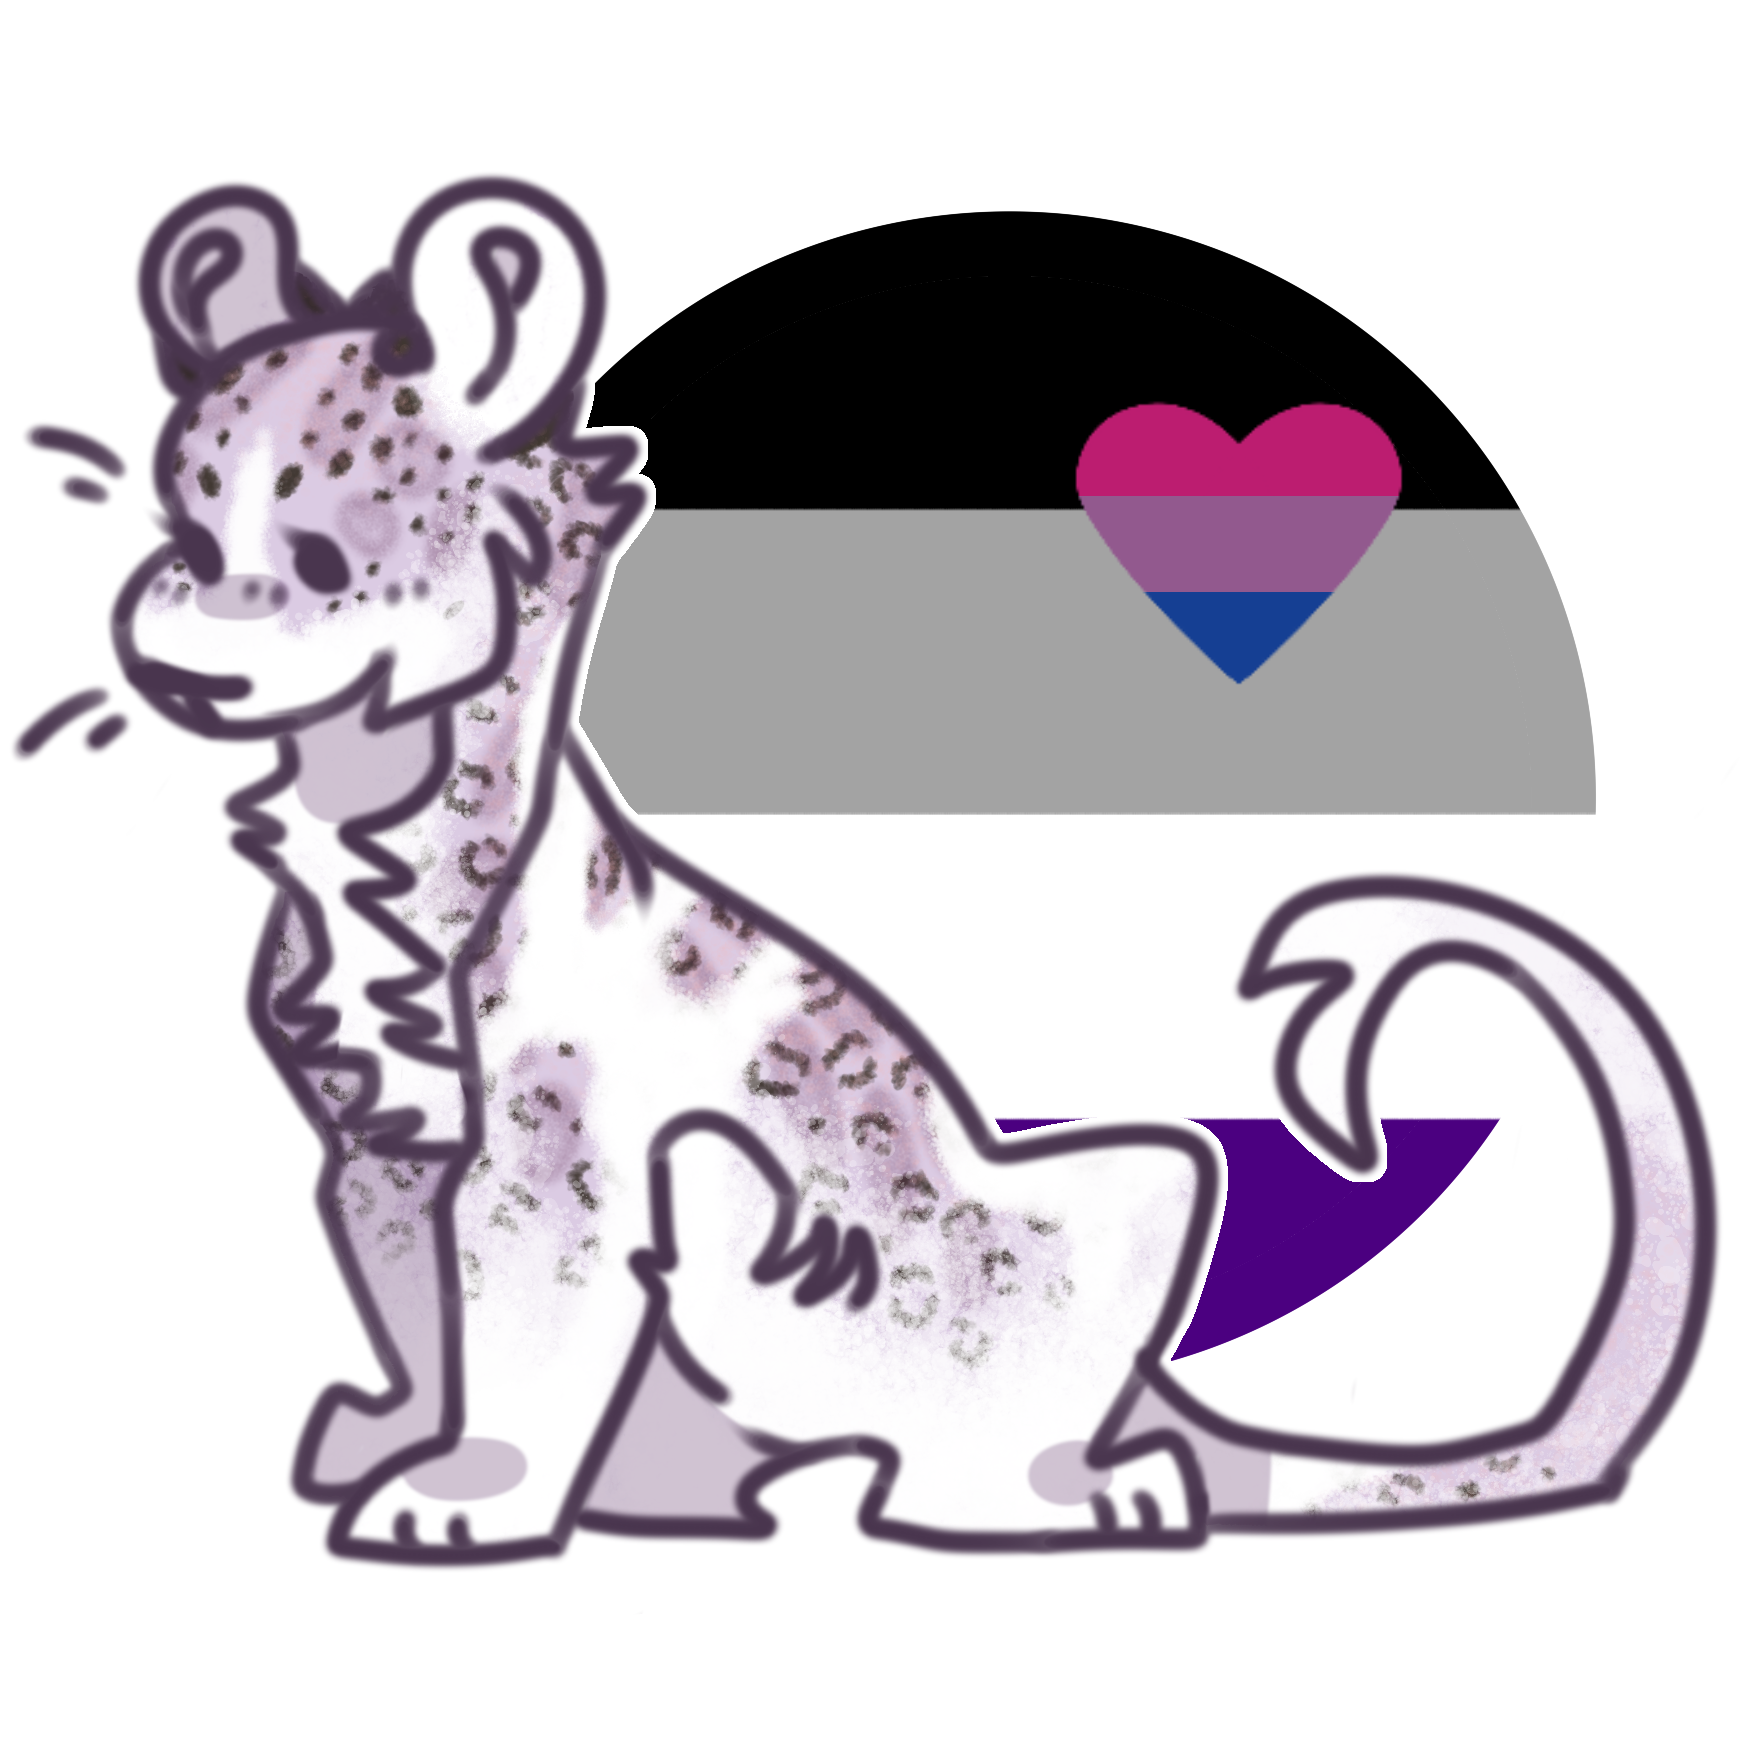 my main king using base 1b. this one has a circular background behind it of the asexual flag with a bisexual colored heart within it.